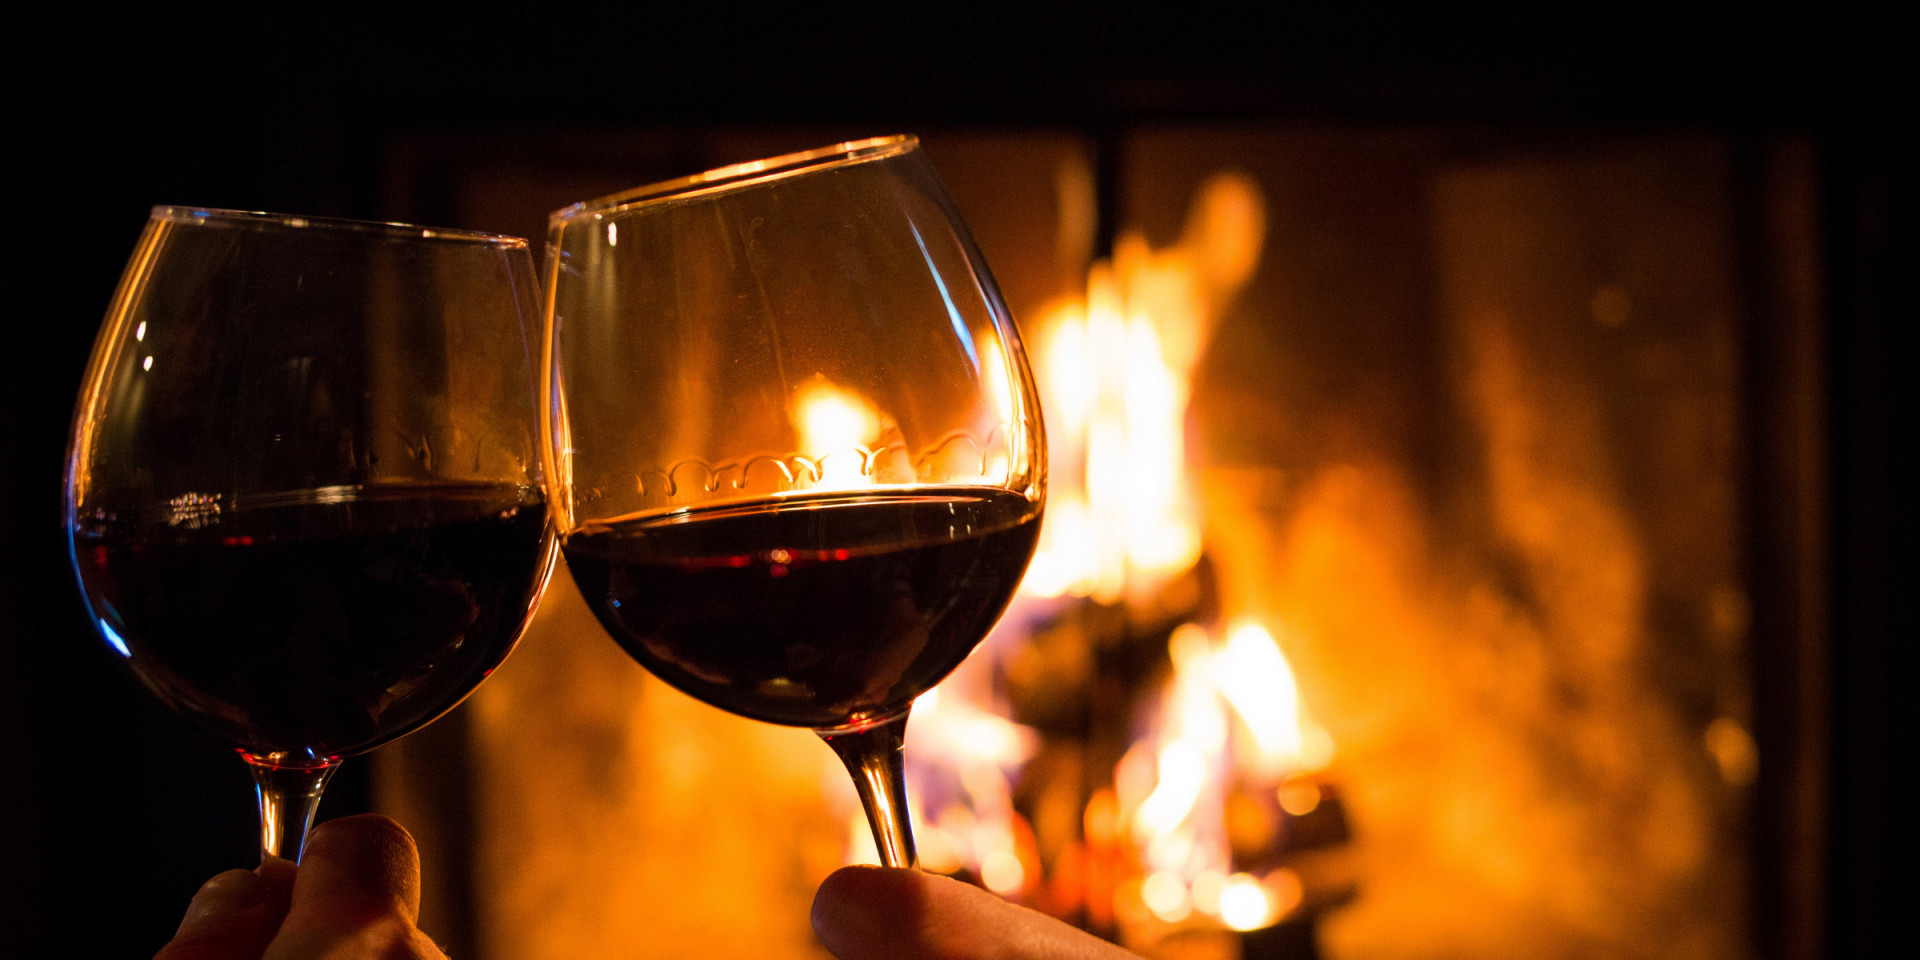 A Local's Guide: 20 of the coziest places in Dallas with fireplaces - Smart City Locating